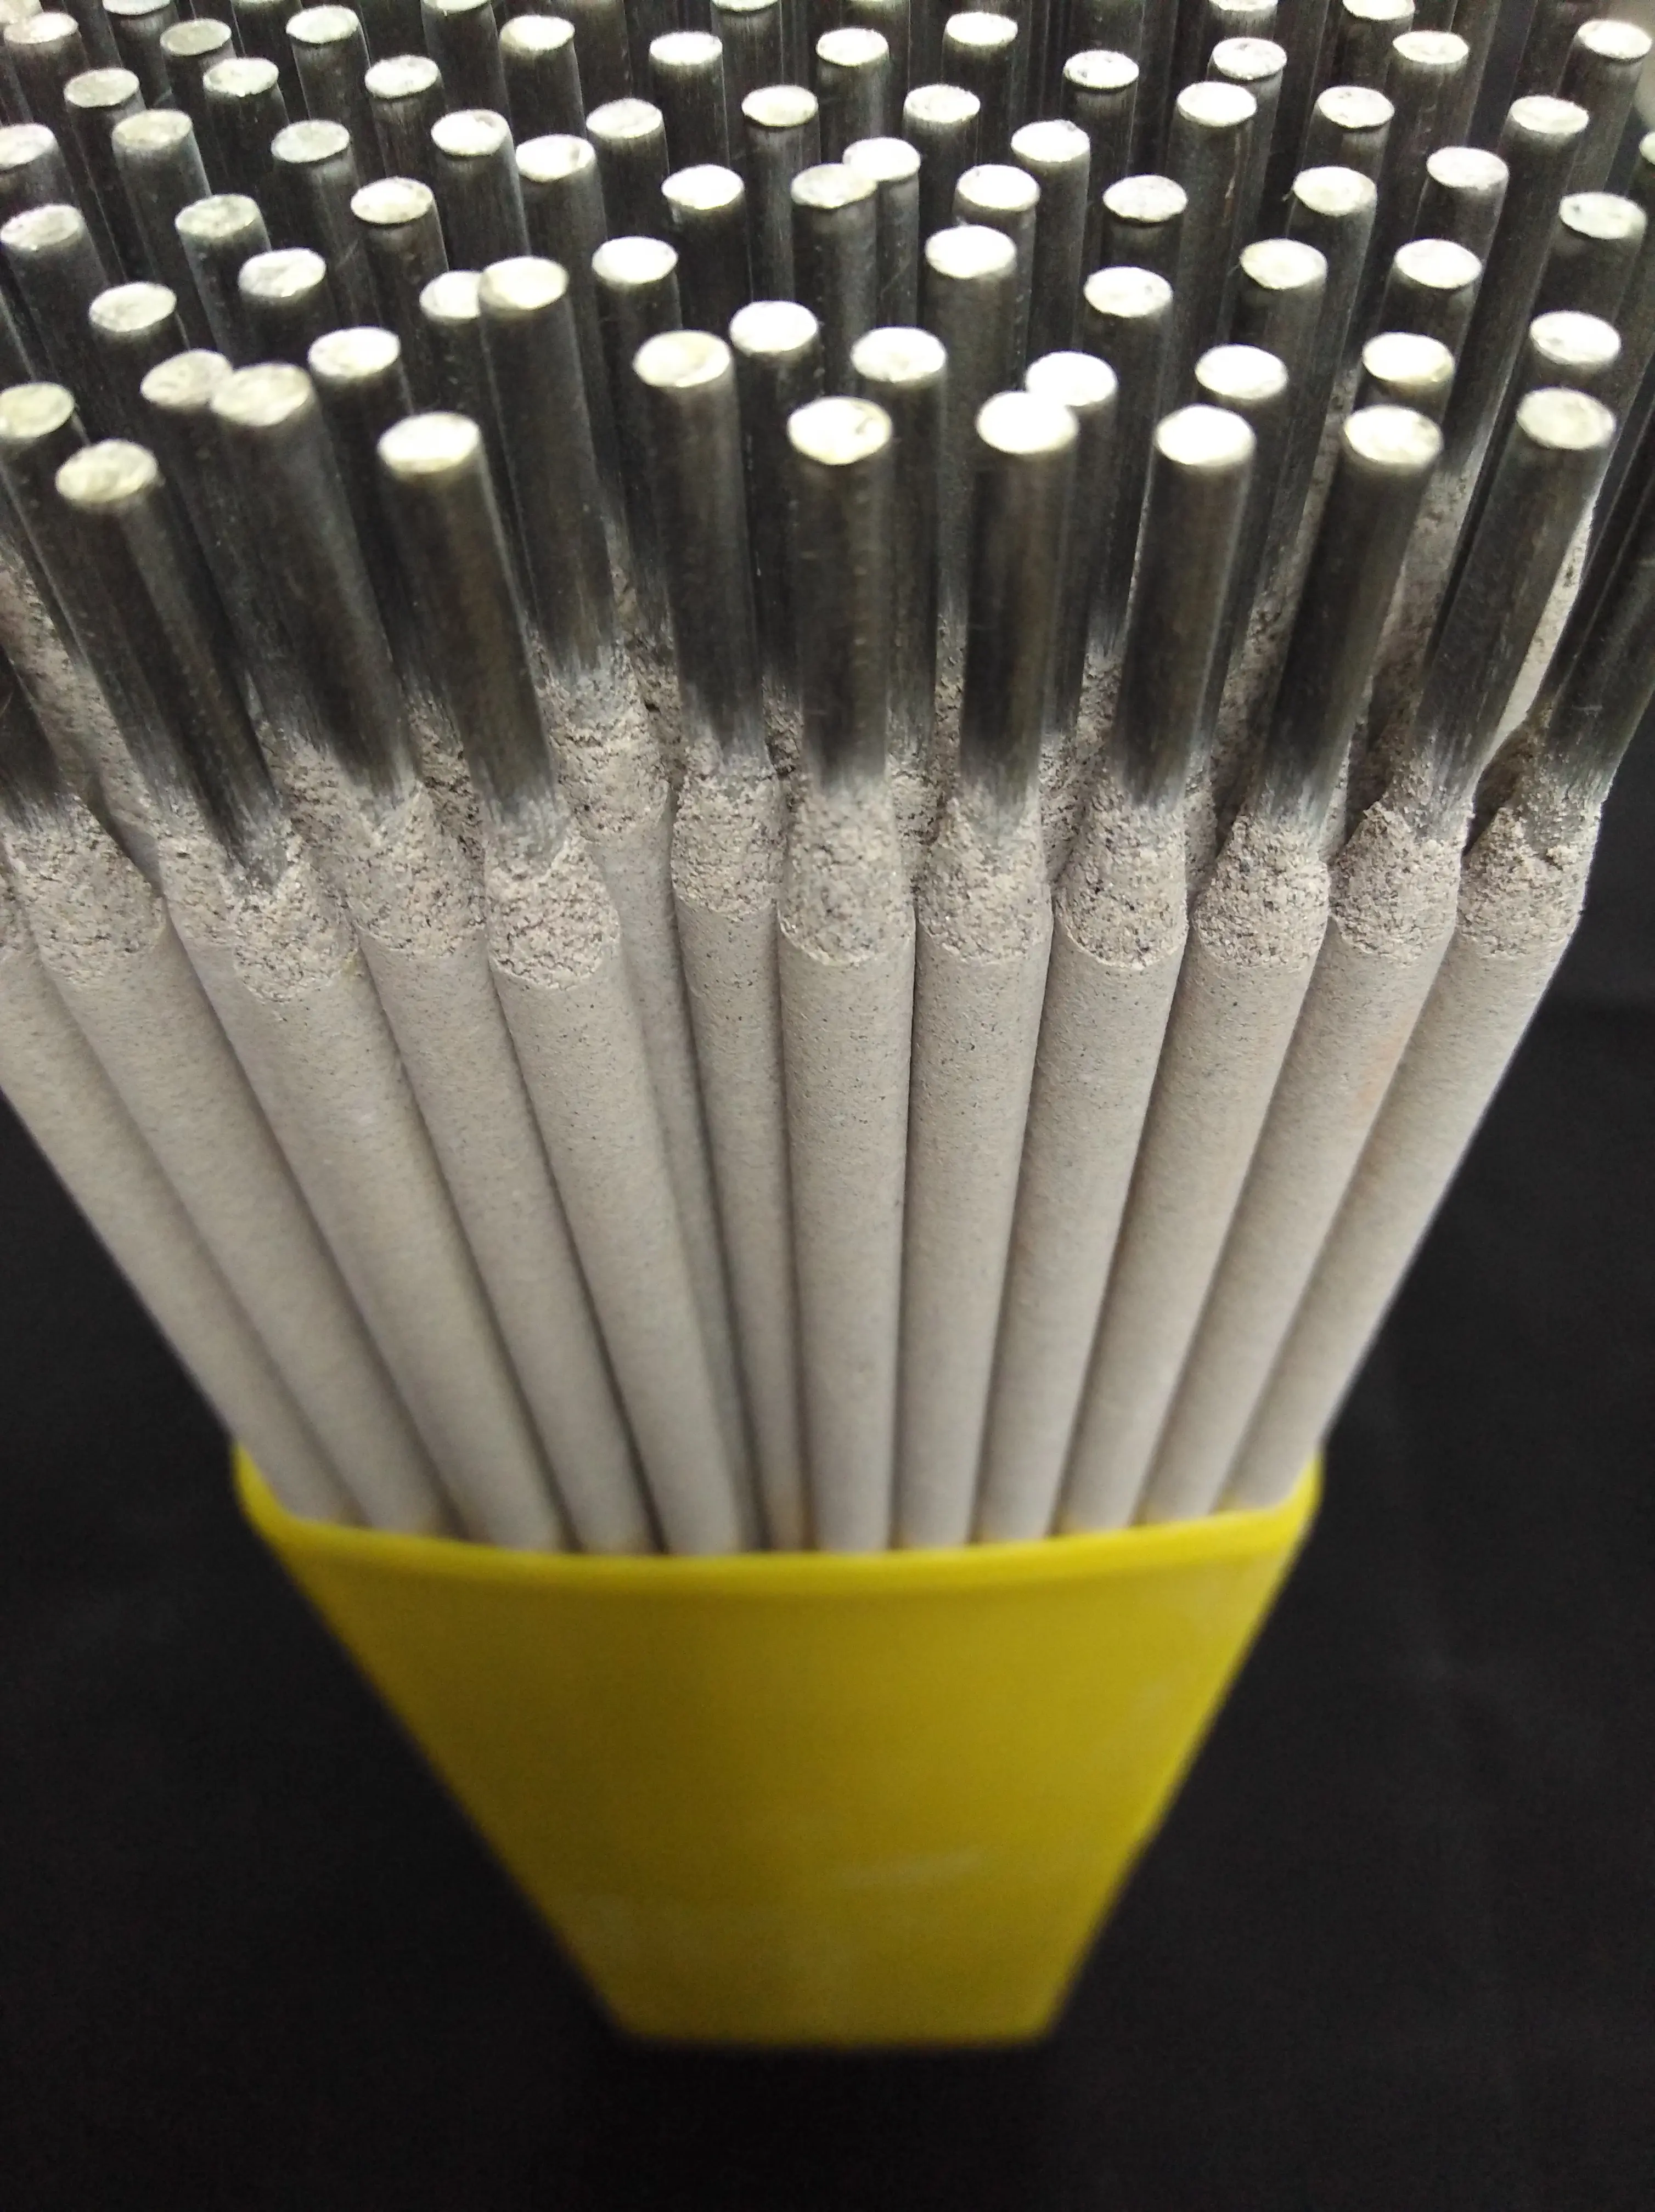 China High Quality 2.5mm 3.2mm 4.0mm 5.0mm Welding Electrodes Stick E6011 Welding Rods For Alloy Steel